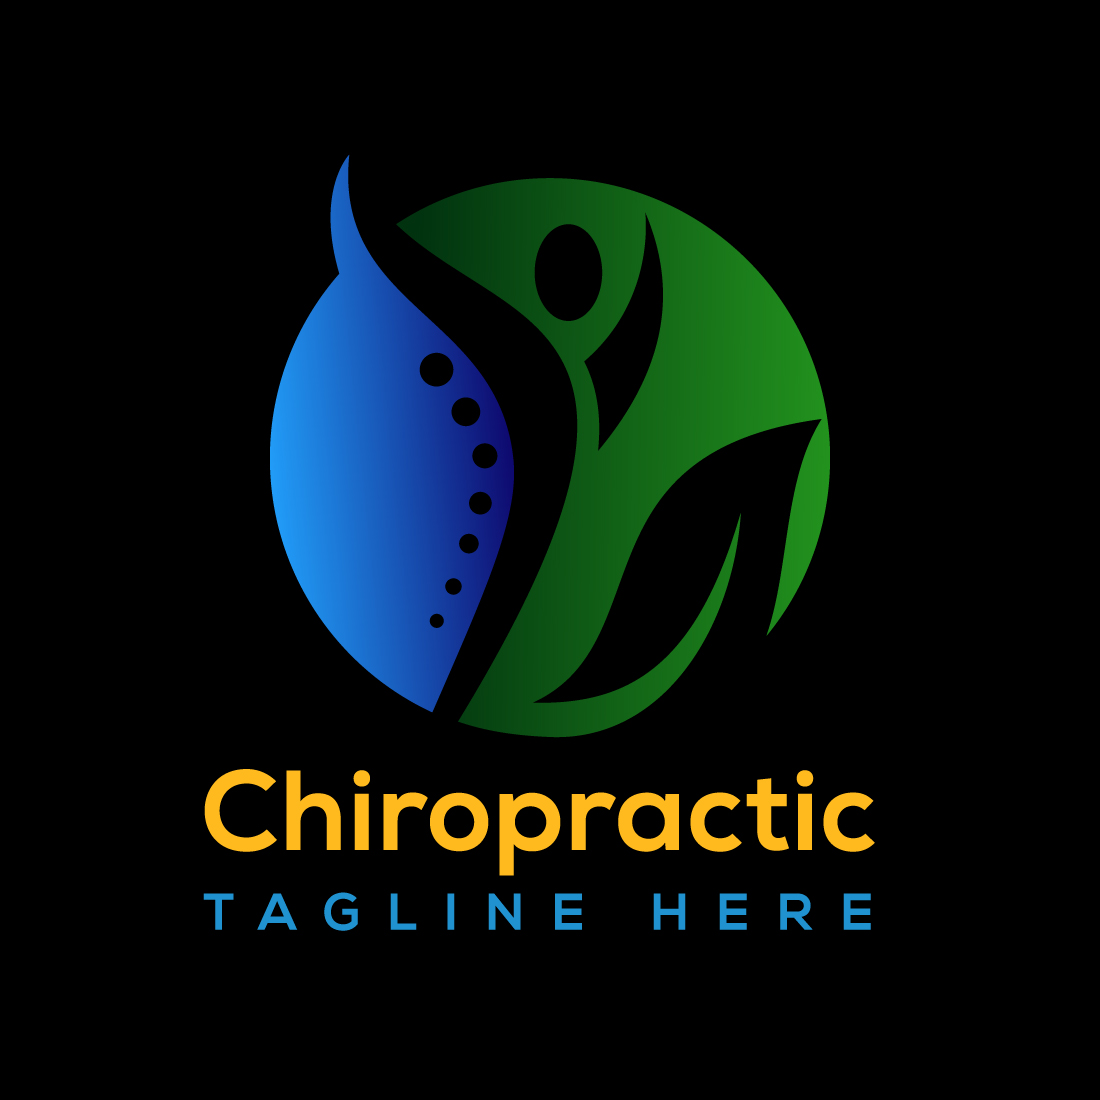 Chiropractic Spine Medical Logo Vector Graphics cover image.